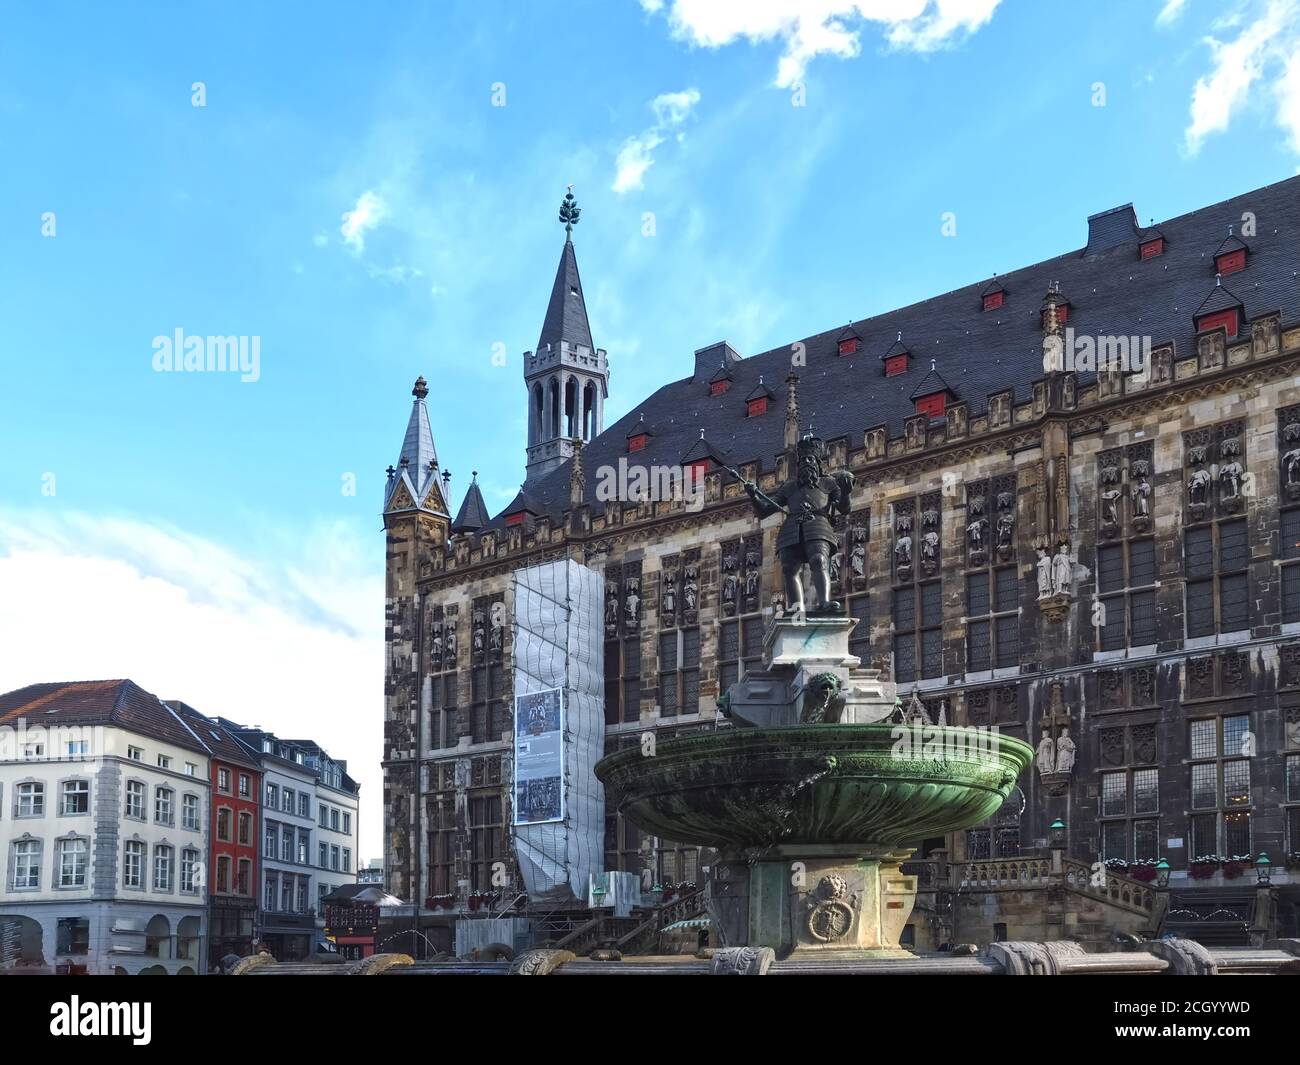 Historic city hall of Aachen in Germany Stock Photo